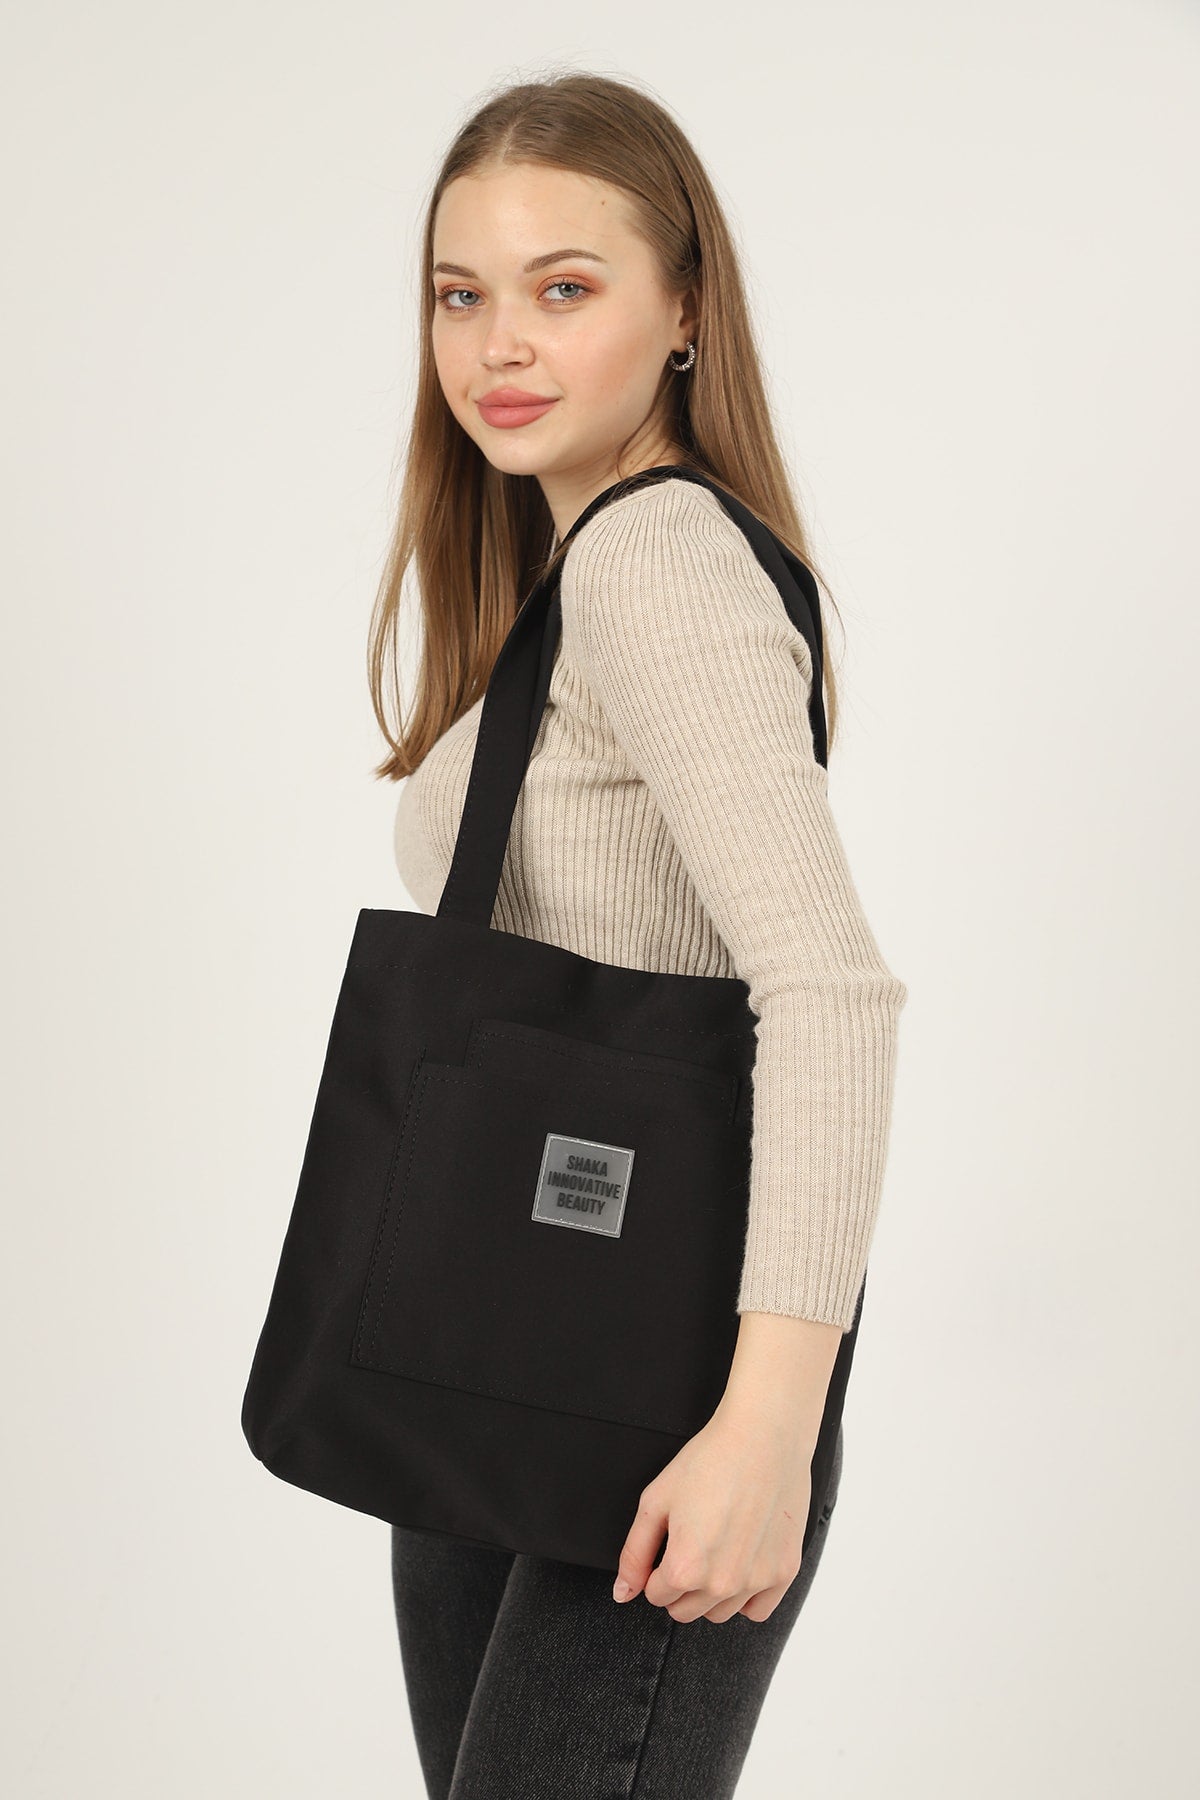 Black U22 3-Compartment Front 2 Pocket Detailed Canvas Fabric Daily Women's Arm and Shoulder Bag B:35 E:35